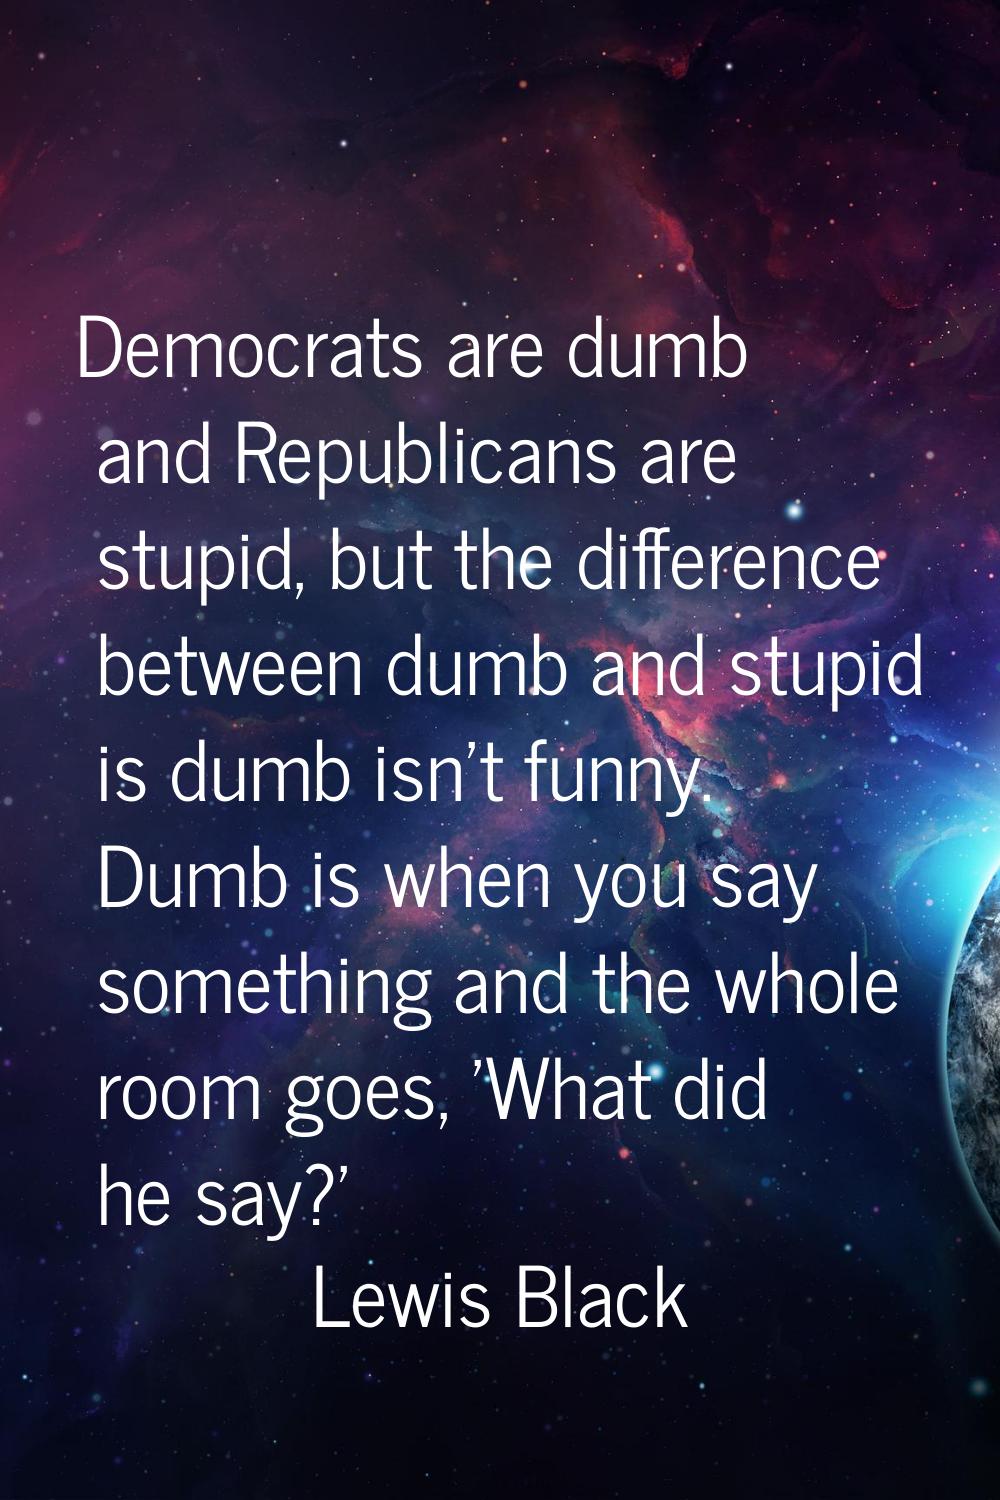 Democrats are dumb and Republicans are stupid, but the difference between dumb and stupid is dumb i